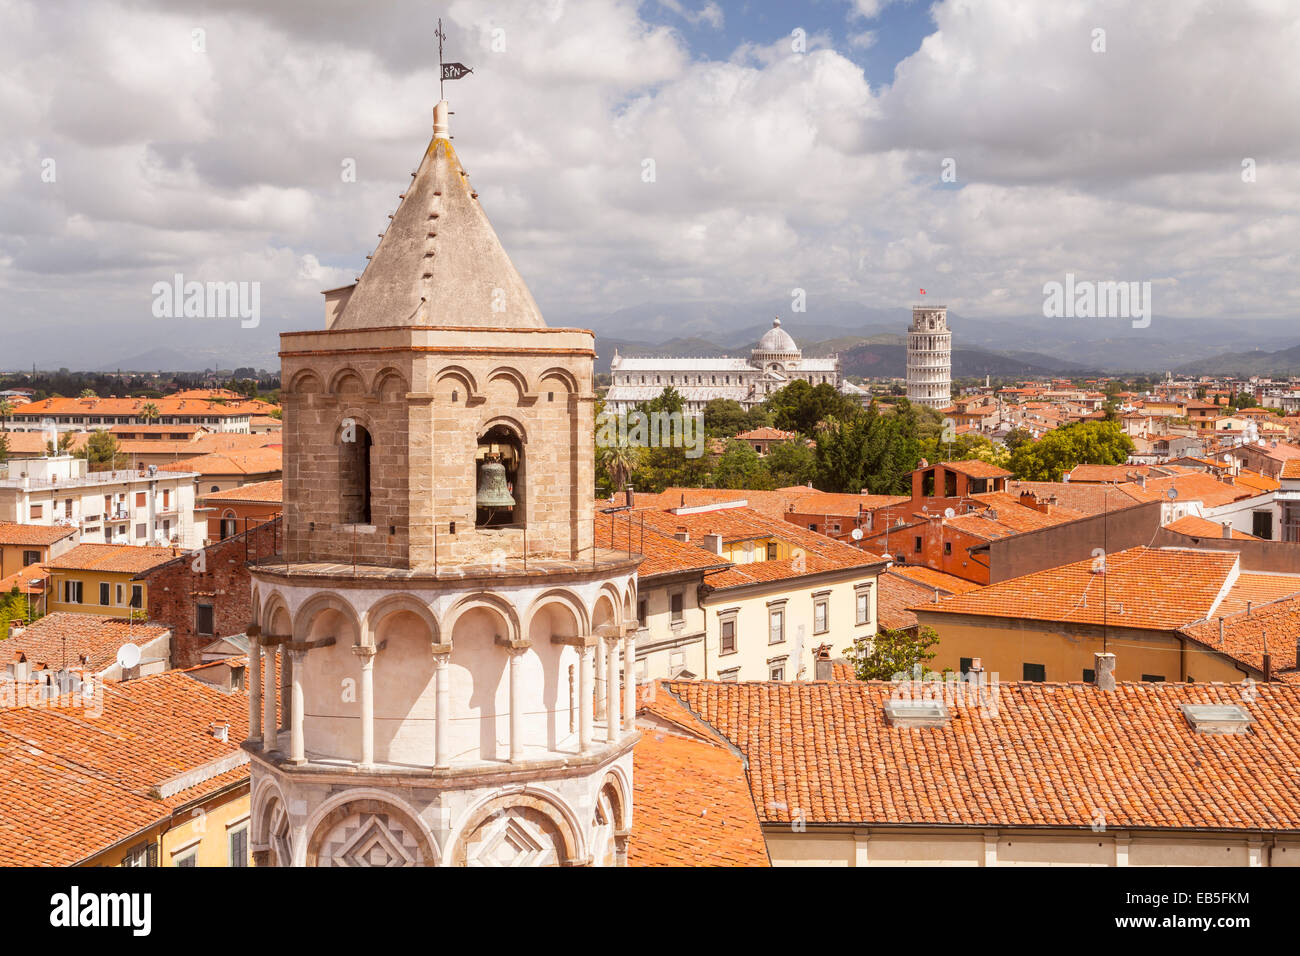 The rooftops of Pisa in Italy. The famous leaning tower and the Duomo di Pisa can be seen in the distance. Stock Photo